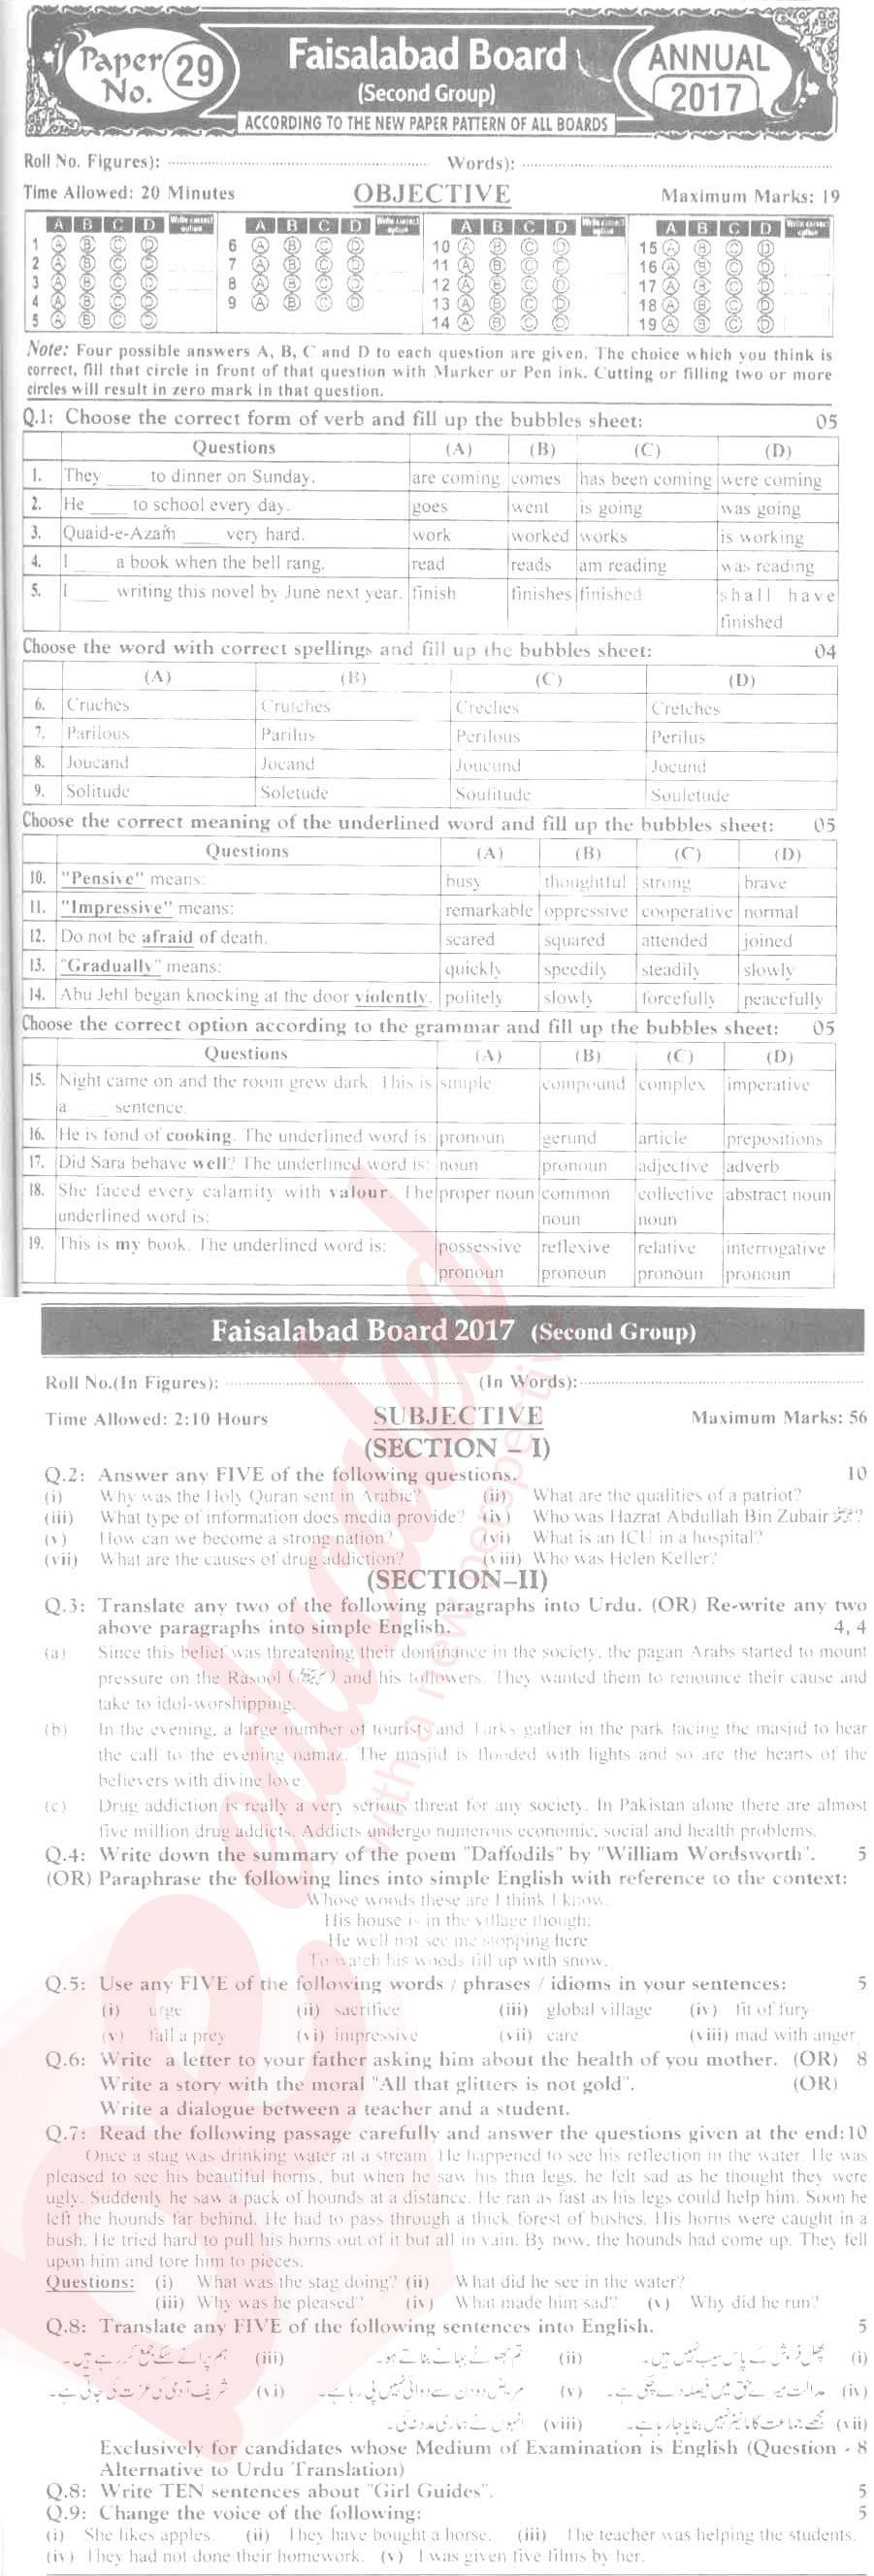 English 9th class Past Paper Group 2 BISE Faisalabad 2017